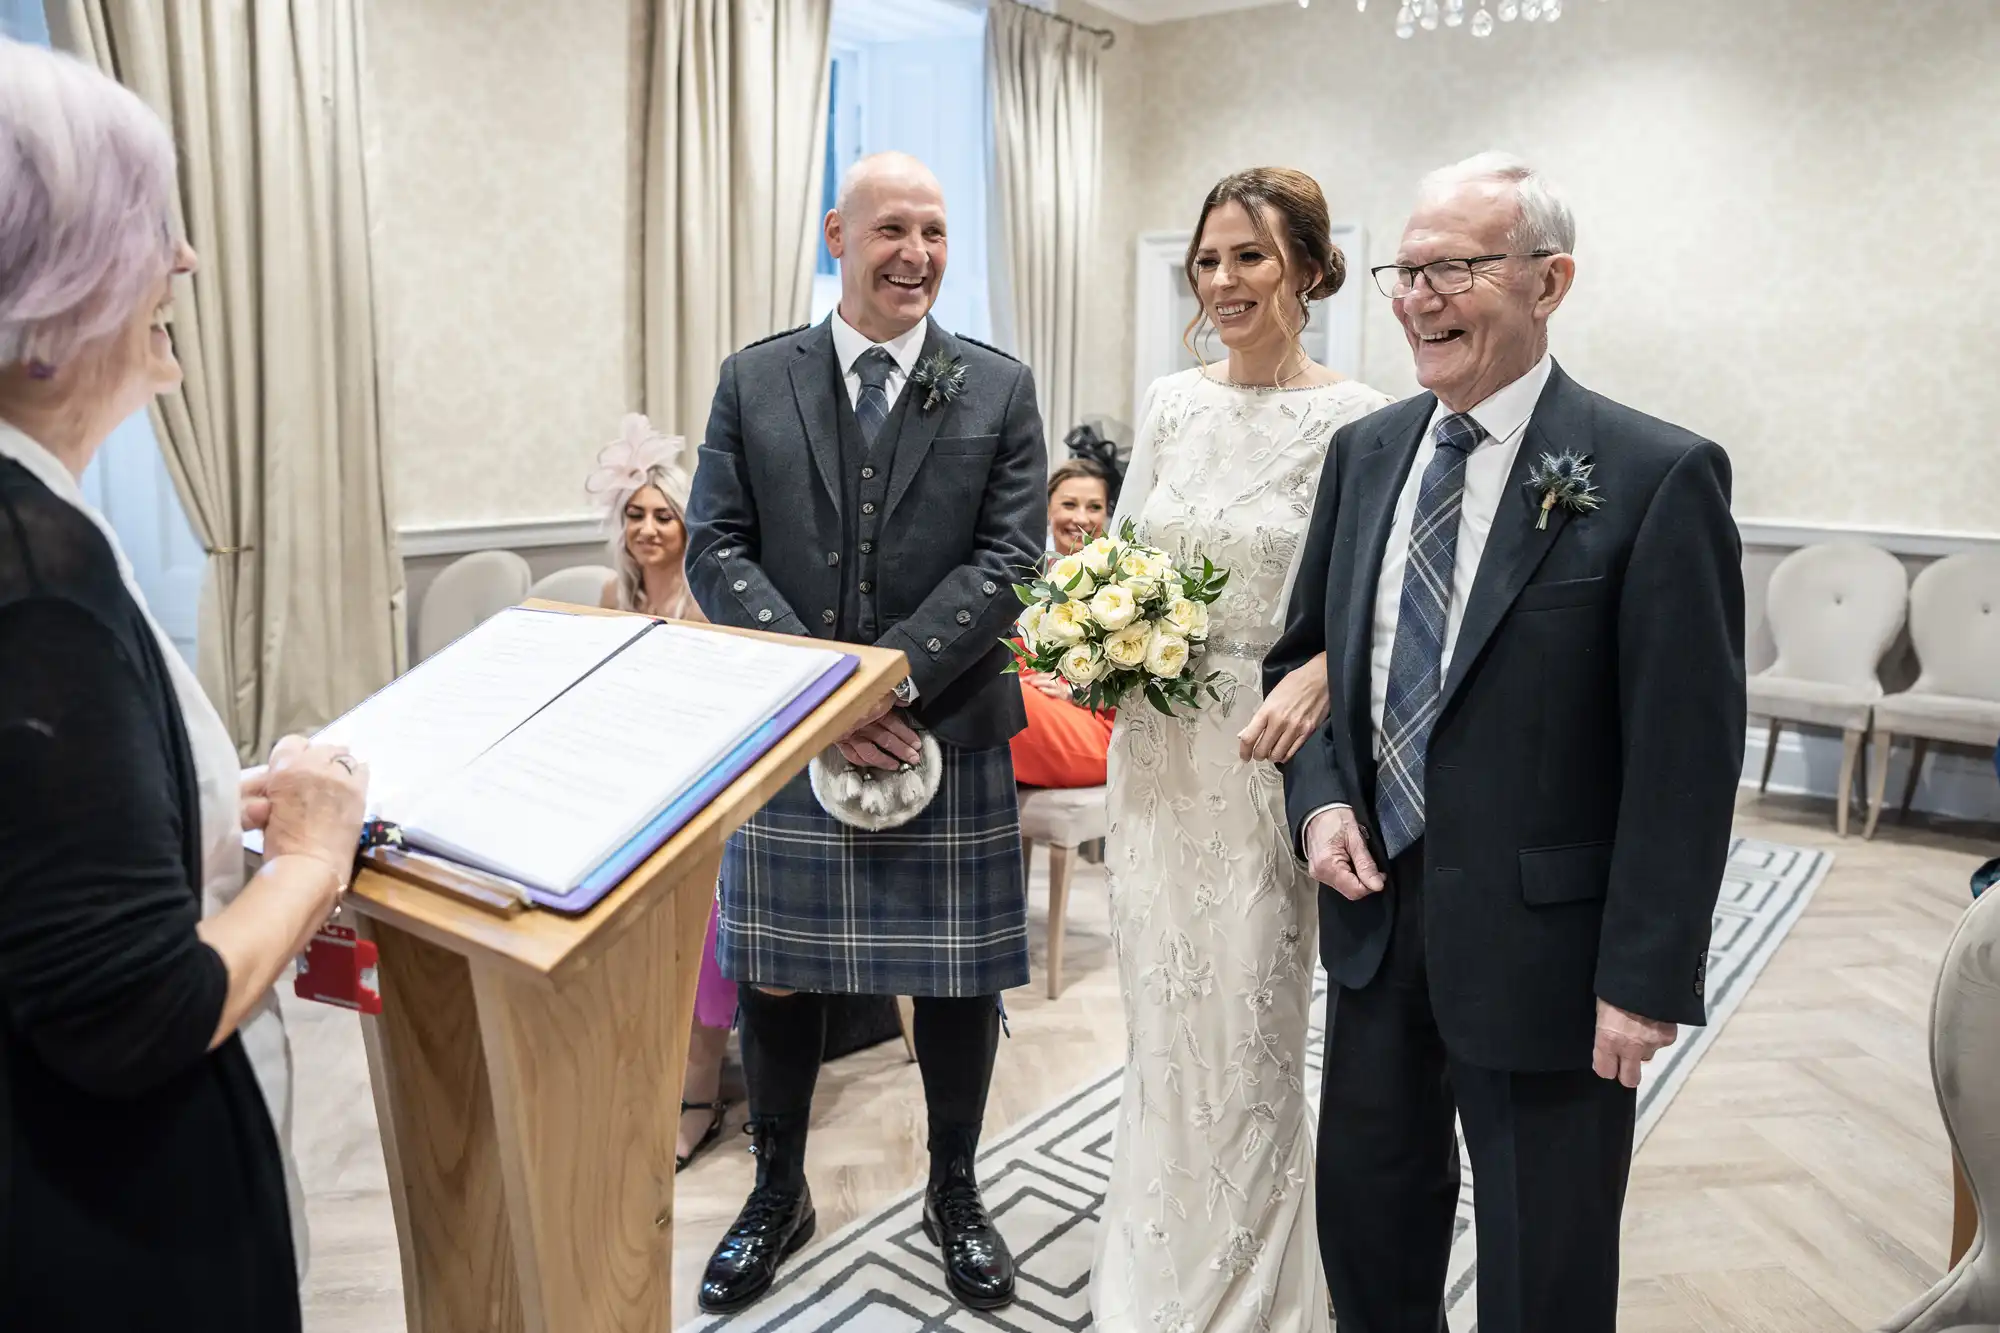 A bride and groom stand next to an elderly man during a wedding ceremony. The groom wears a kilt and the bride holds a bouquet. An officiant is reading from a book at a podium. Guests are seated behind.